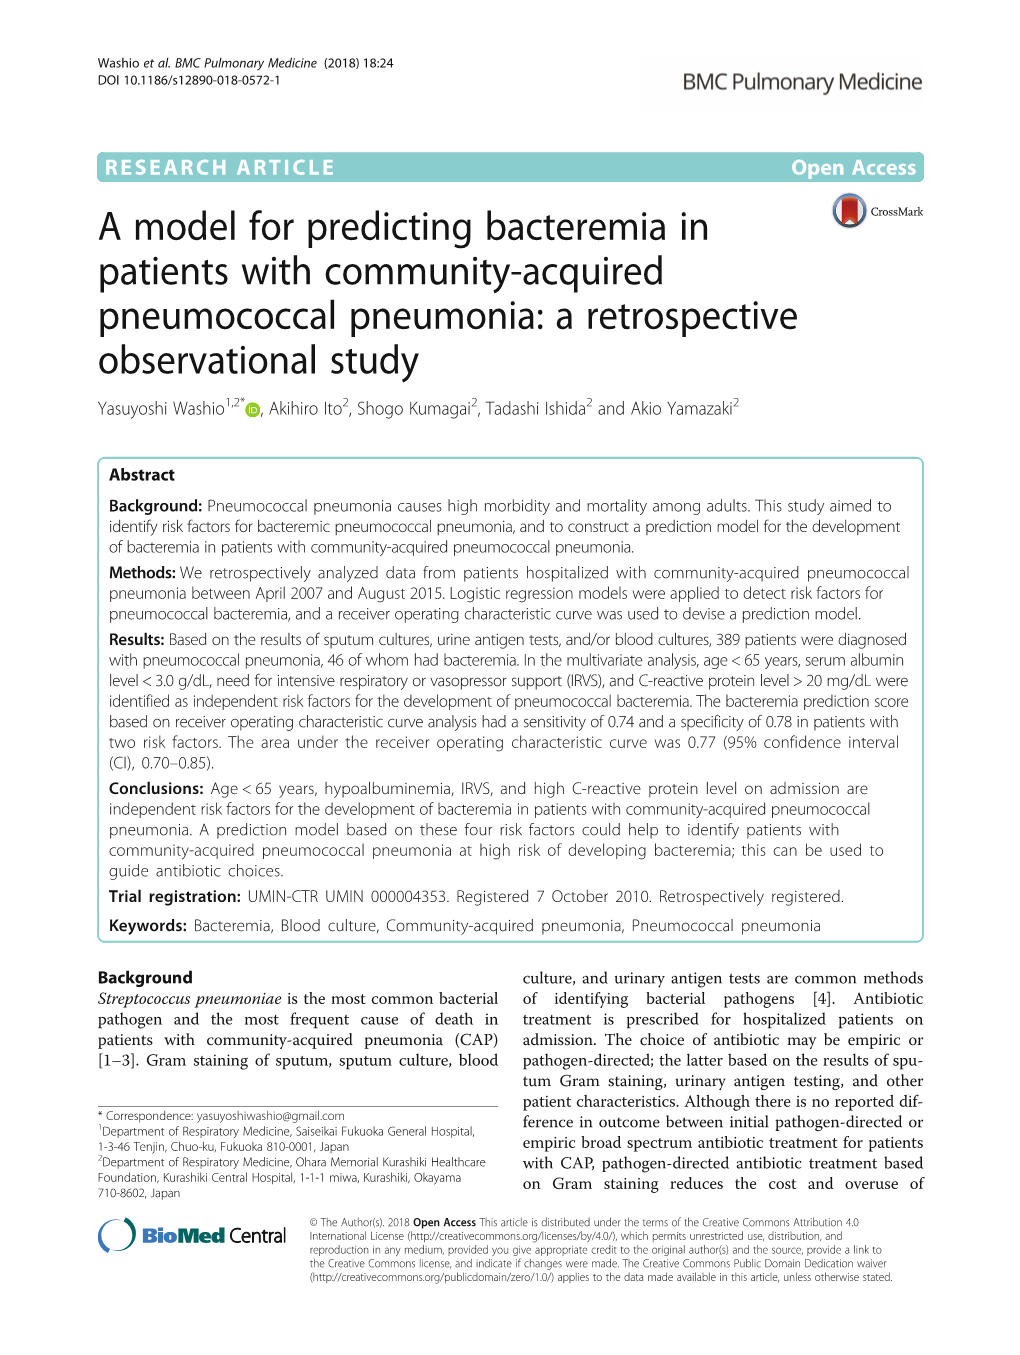 A Model for Predicting Bacteremia in Patients with Community-Acquired